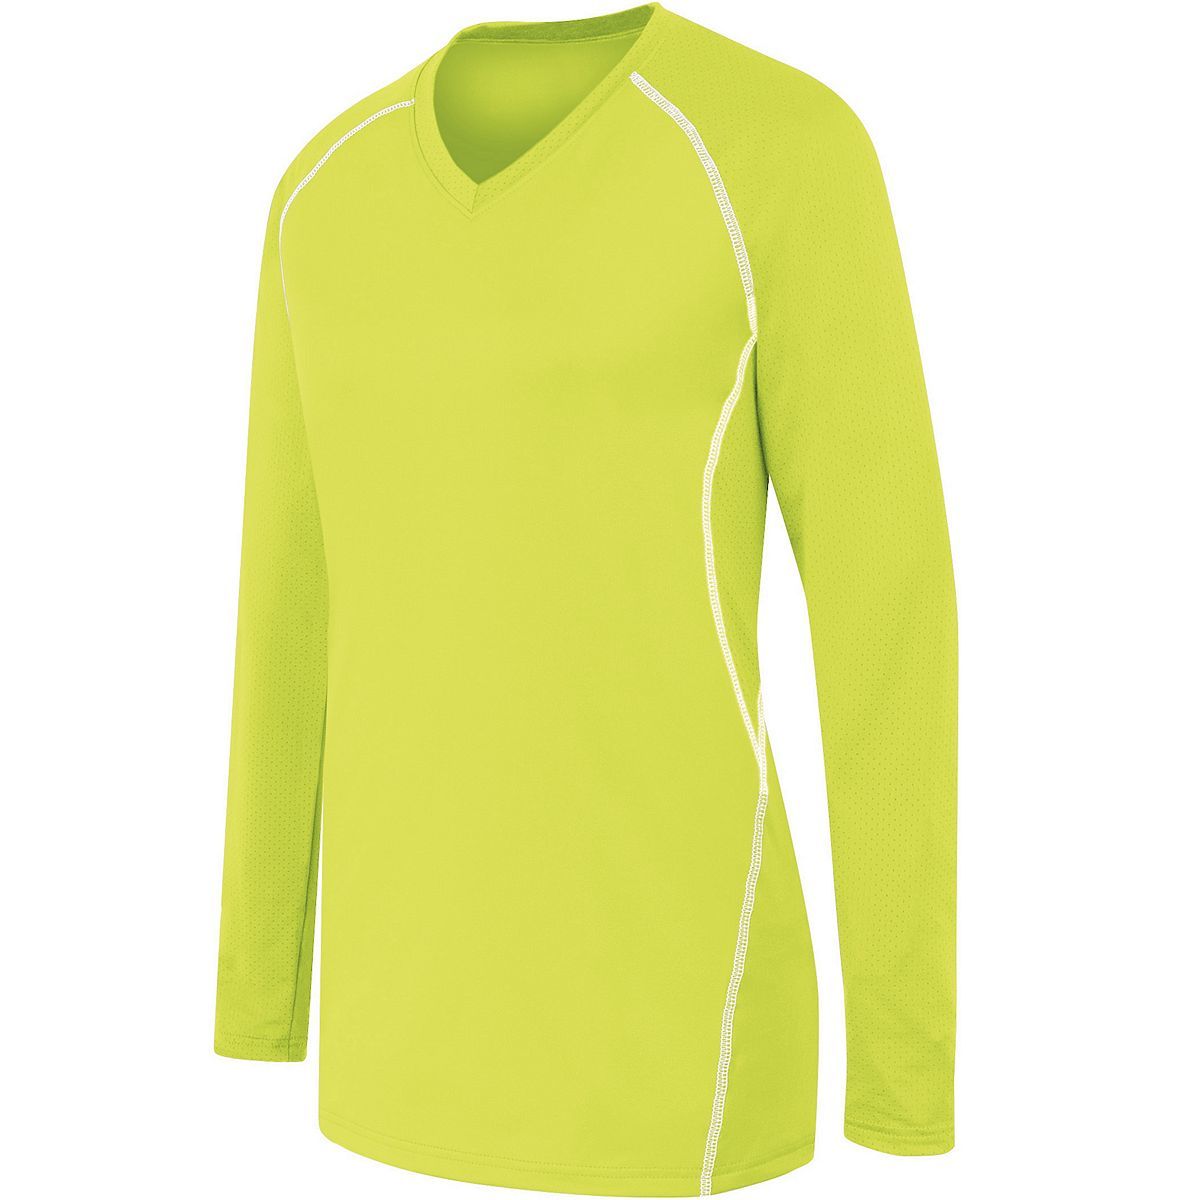 High 5 Ladies Long Sleeve Solid Jersey in Lime/White  -Part of the Ladies, Ladies-Jersey, High5-Products, Volleyball, Shirts product lines at KanaleyCreations.com